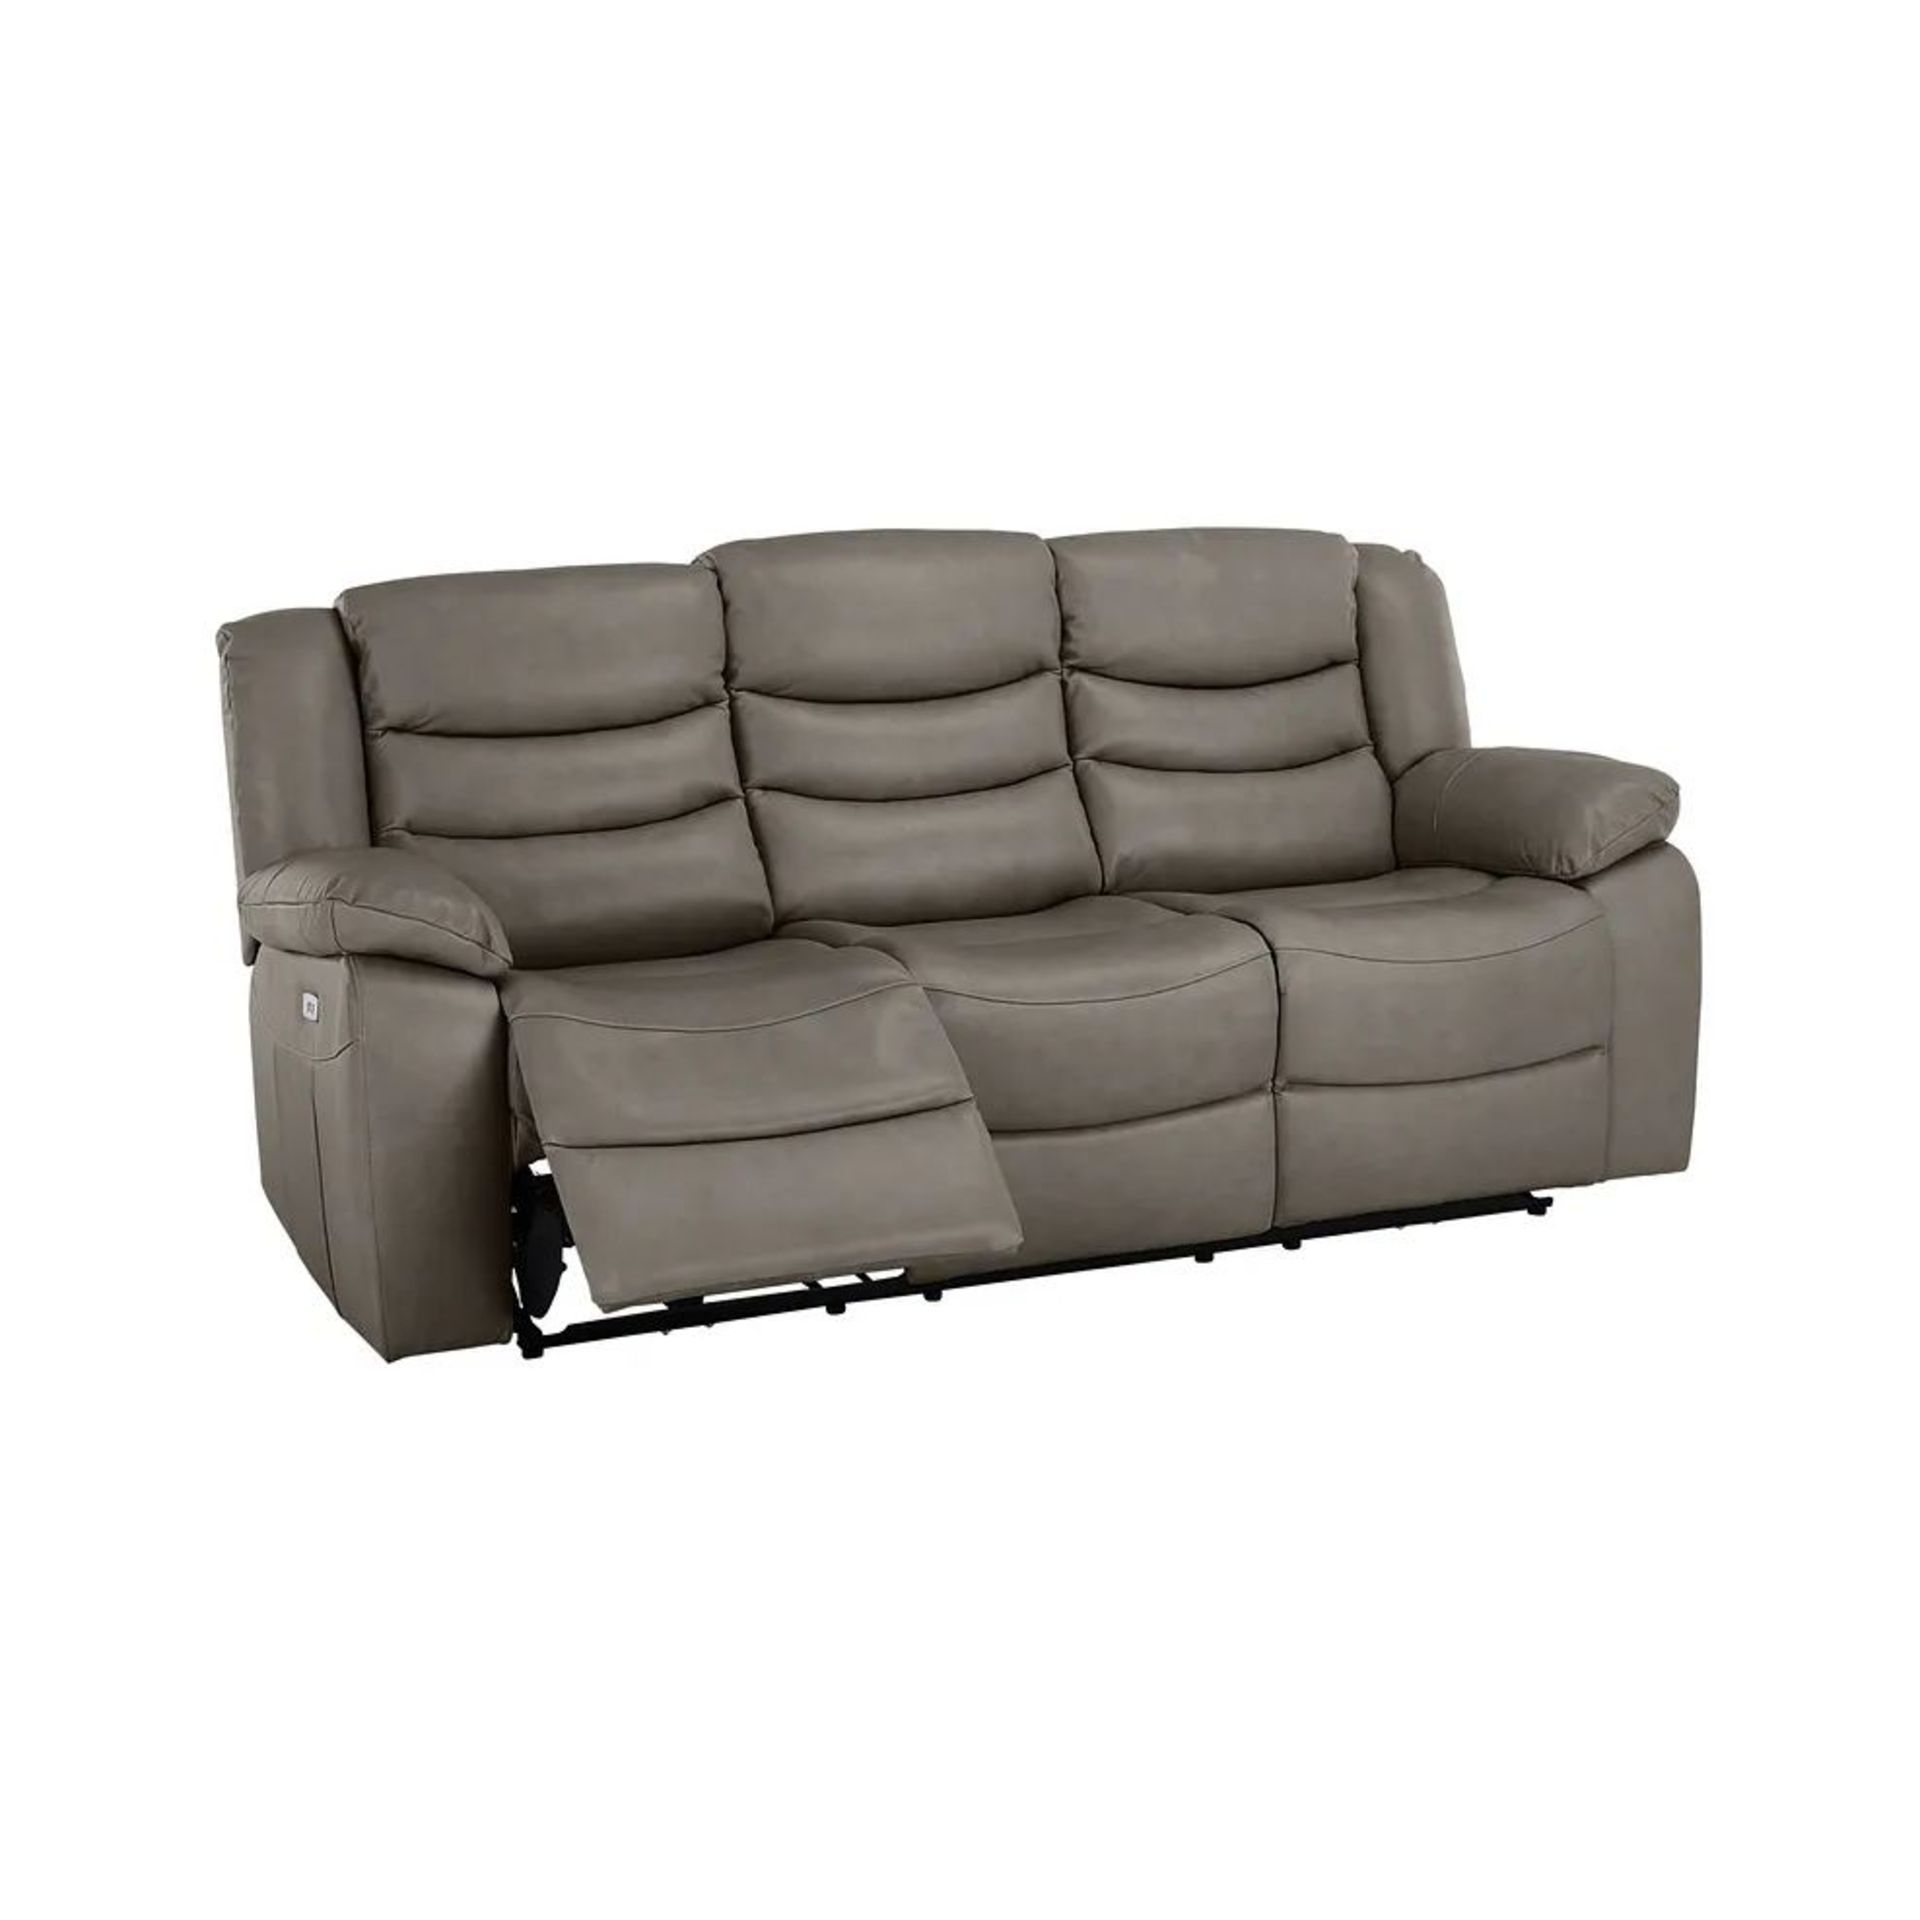 BRAND NEW MARLOW 3 Seater Electric Recliner Sofa - DARK GREY LEATHER. RRP £1849. Our Marlow - Bild 3 aus 11